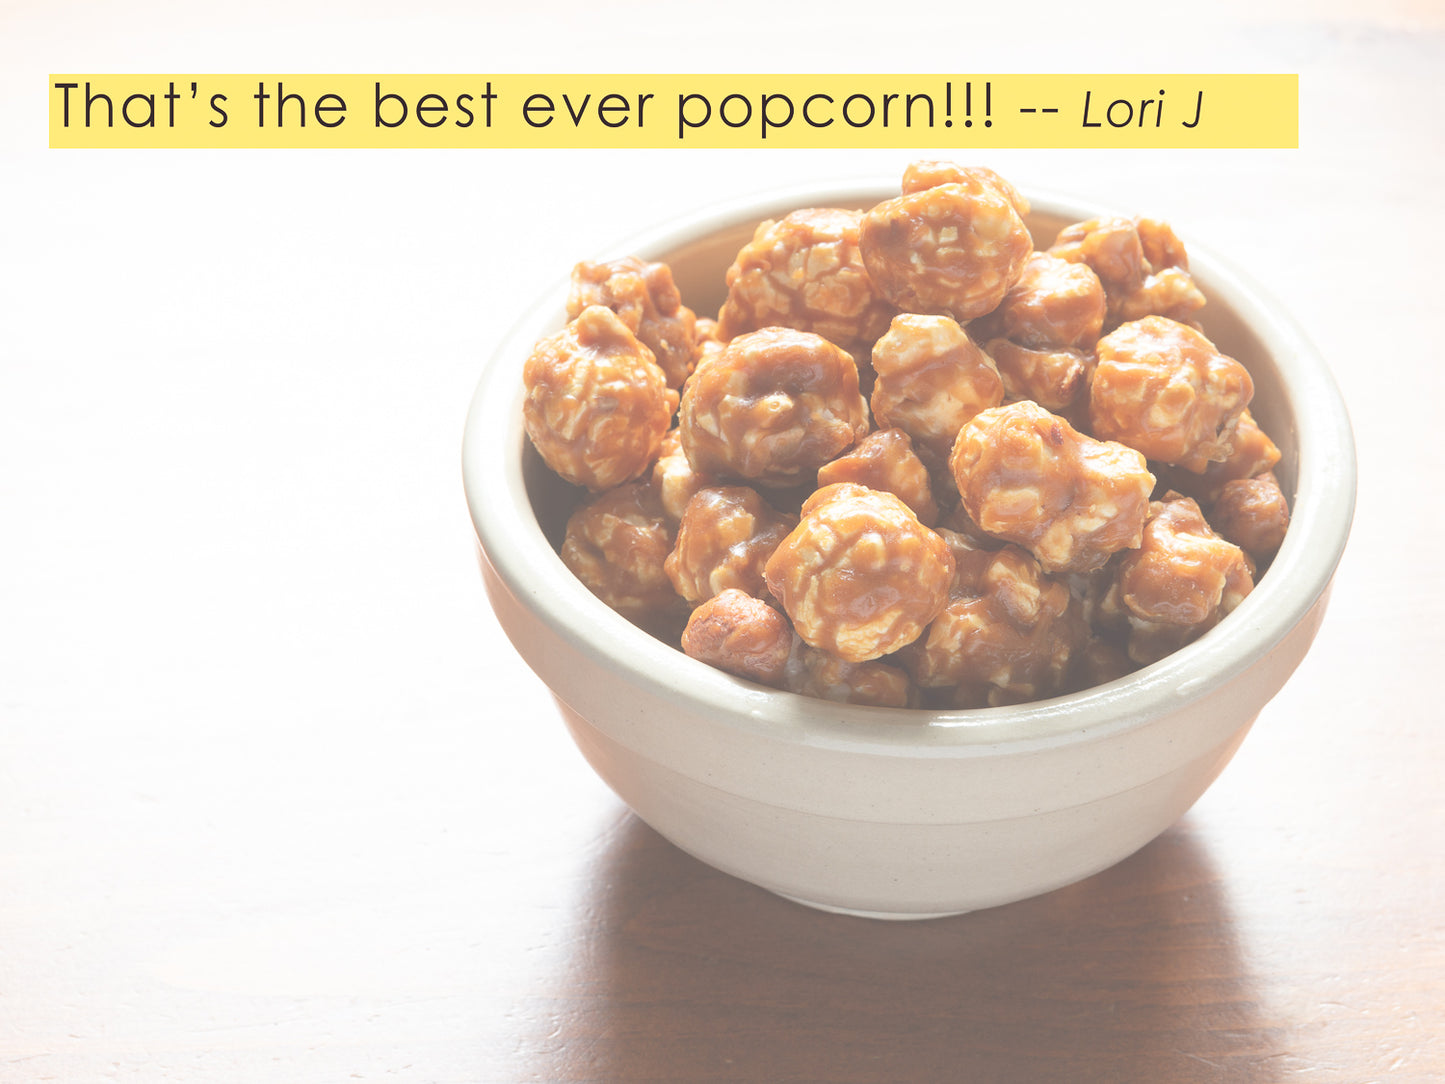 someone's favorable review of freedom pop gourmet toffee popcorn